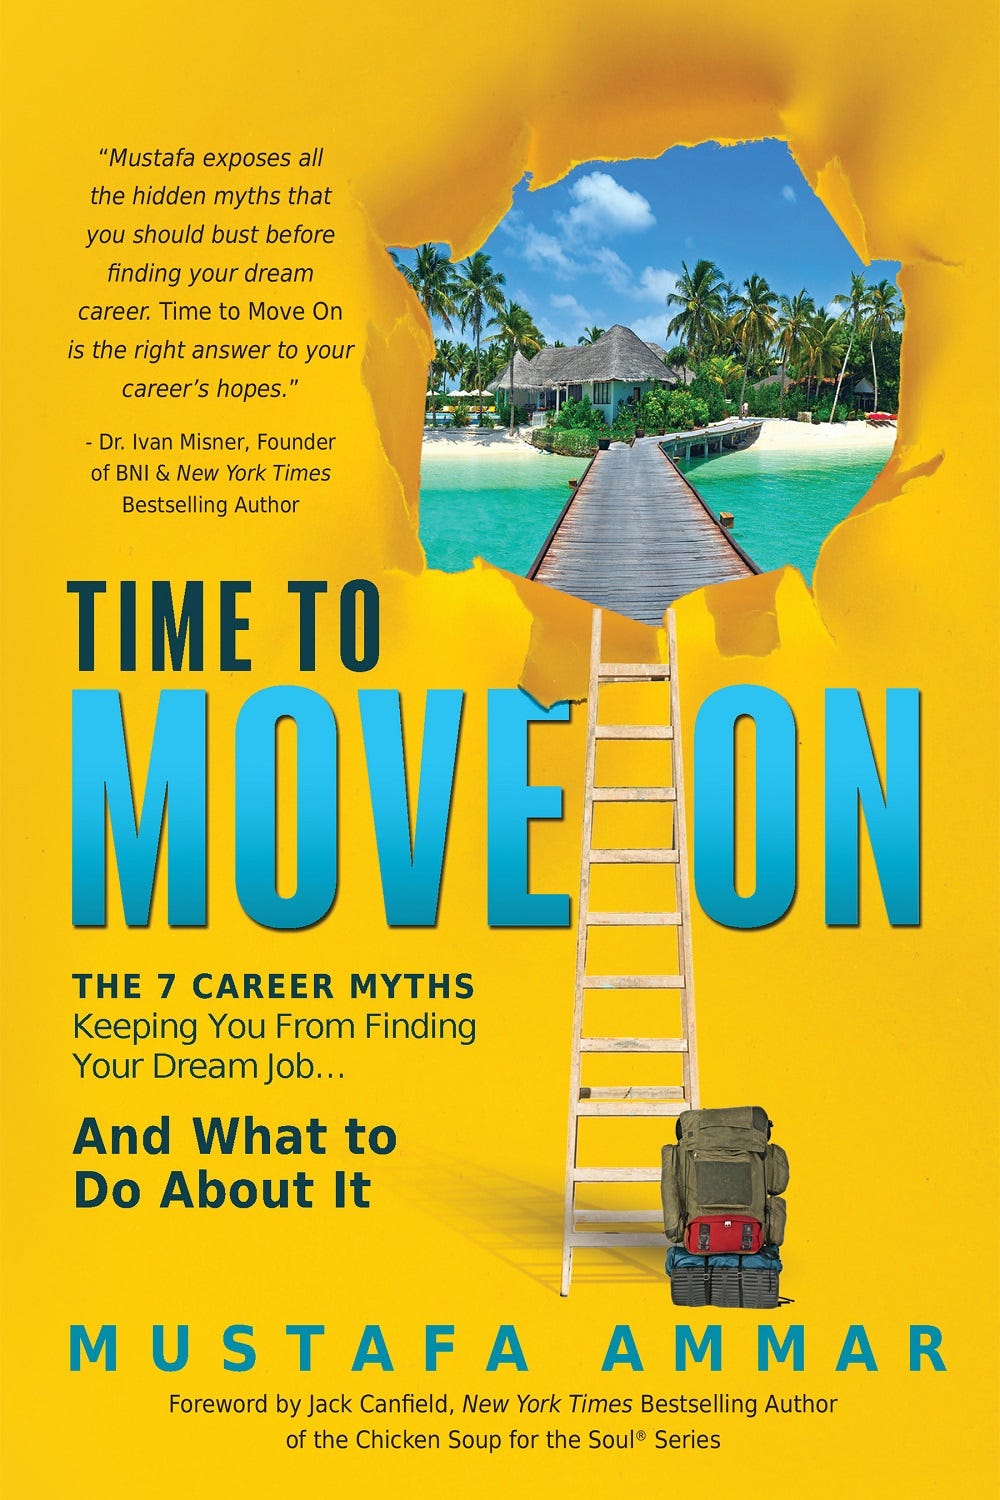 Mustafa Ammar, author of Time to Move On: The 7 Career Myths Keeping You from Finding Your Dream Job, And What to Do About It